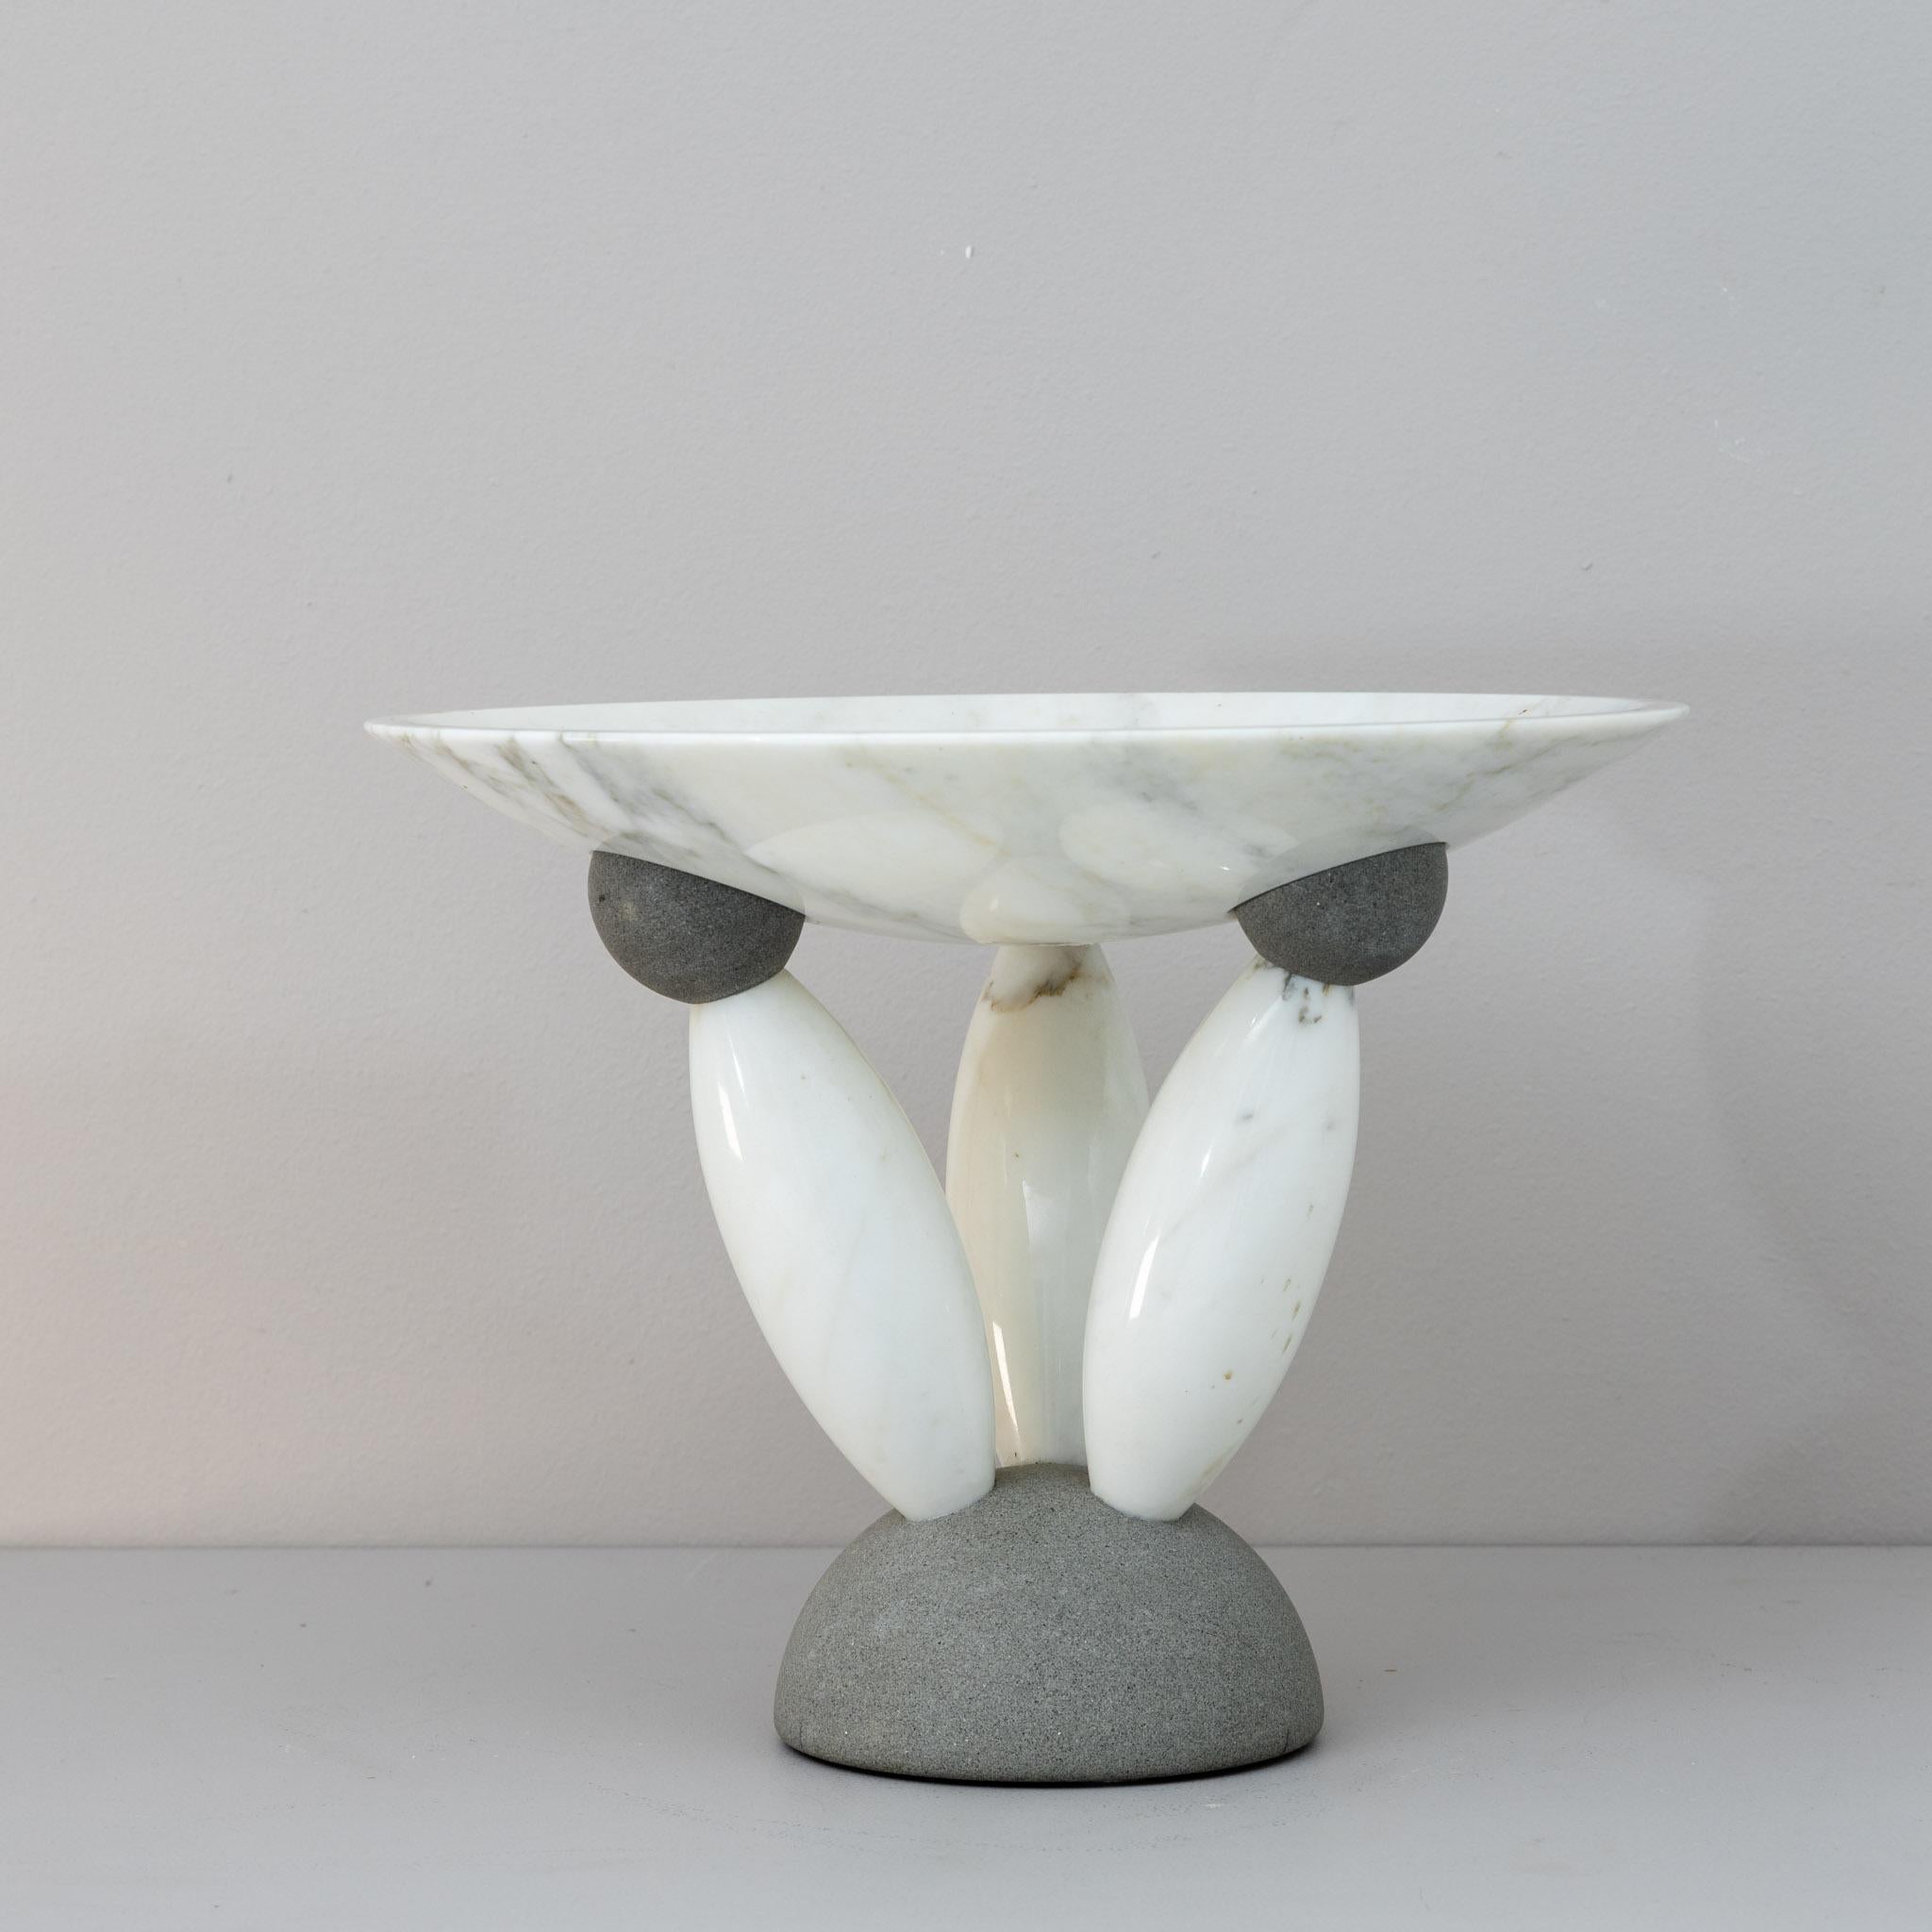 Matteo Thun Modernist marble centerpiece.
a shallow bowl in white marble atop a sculptural,
minimalist base of Pietra Serena and three marble supports.